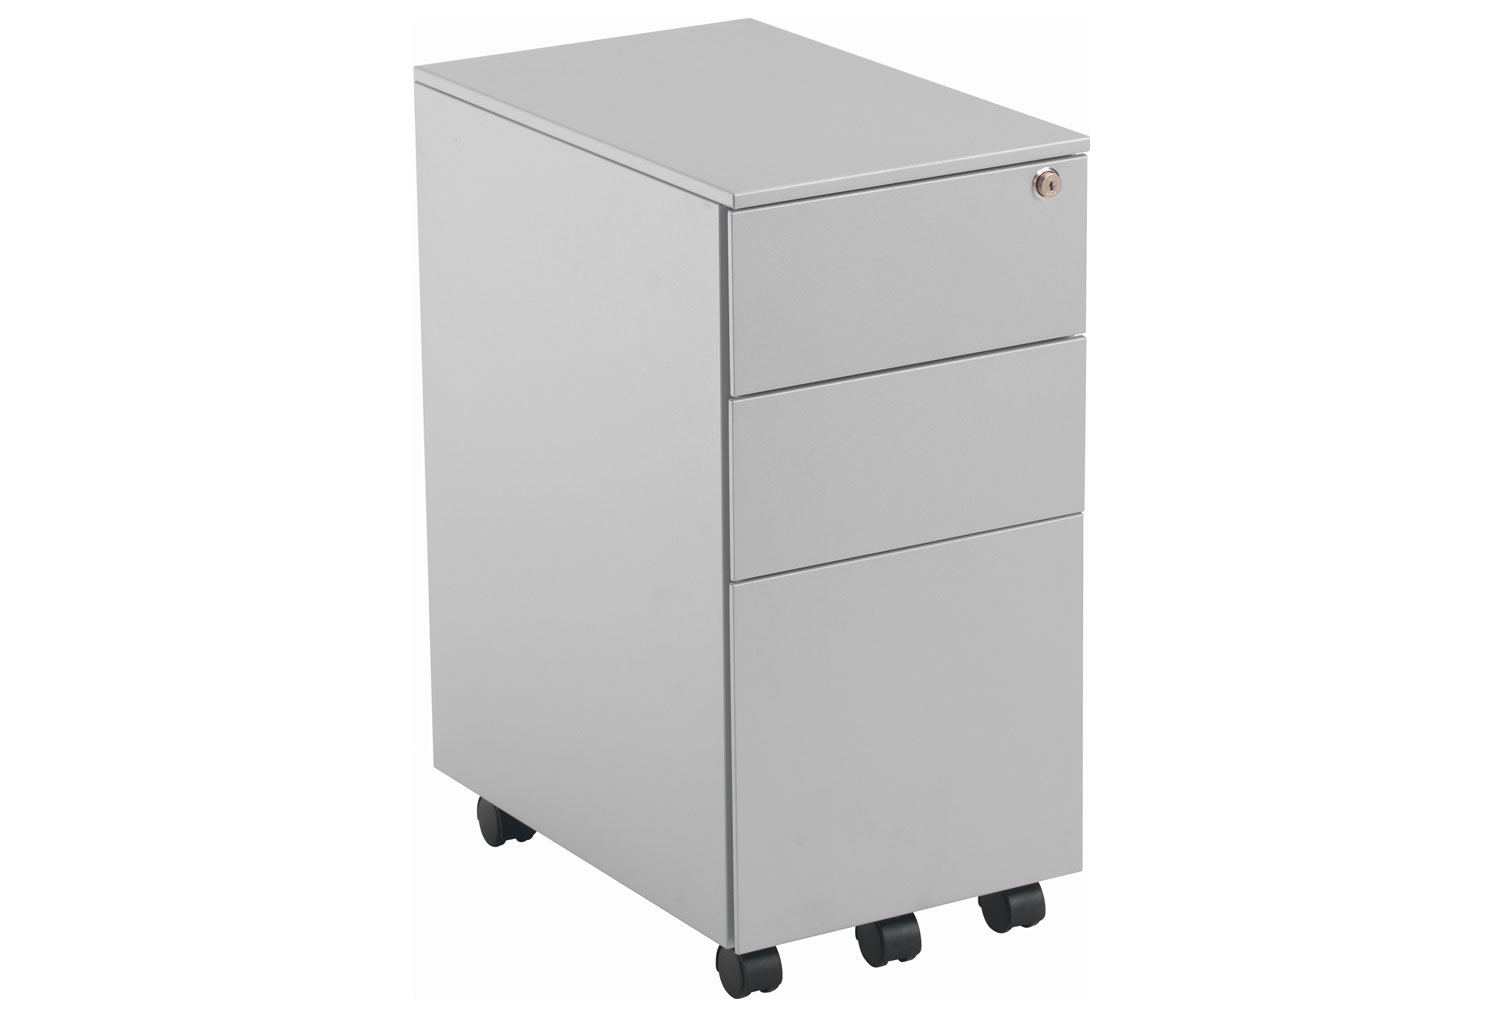 Proteus Narrow Steel Pedestal, Silver, Express Delivery